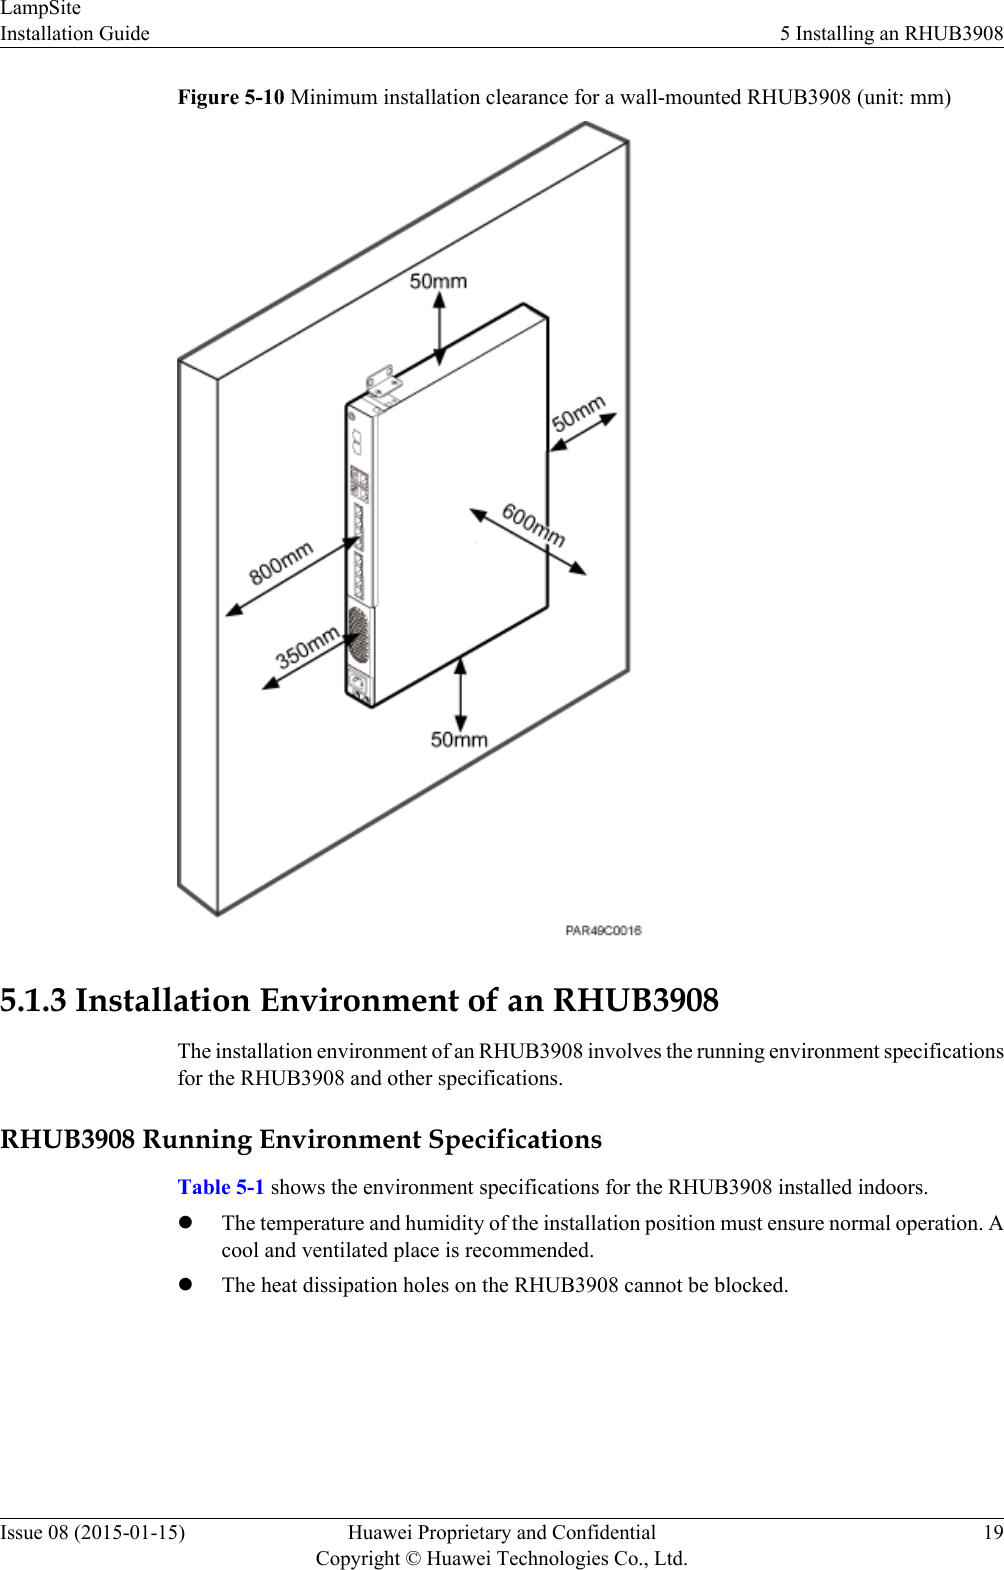 Figure 5-10 Minimum installation clearance for a wall-mounted RHUB3908 (unit: mm)5.1.3 Installation Environment of an RHUB3908The installation environment of an RHUB3908 involves the running environment specificationsfor the RHUB3908 and other specifications.RHUB3908 Running Environment SpecificationsTable 5-1 shows the environment specifications for the RHUB3908 installed indoors.lThe temperature and humidity of the installation position must ensure normal operation. Acool and ventilated place is recommended.lThe heat dissipation holes on the RHUB3908 cannot be blocked.LampSiteInstallation Guide 5 Installing an RHUB3908Issue 08 (2015-01-15) Huawei Proprietary and ConfidentialCopyright © Huawei Technologies Co., Ltd.19